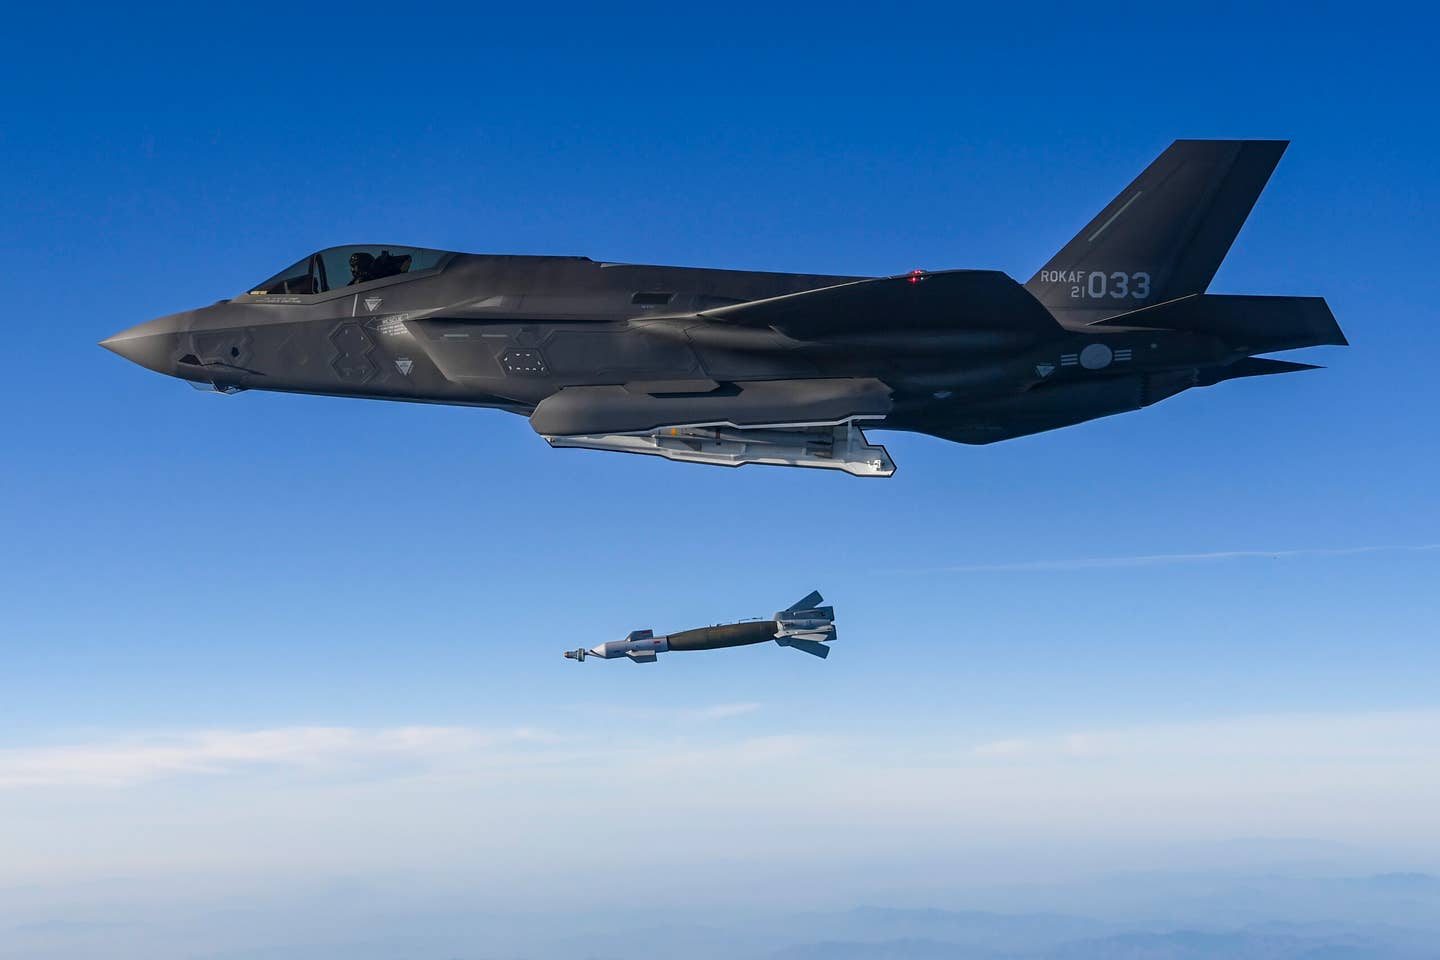 A Republic of Korea Air Force F-35A stealth fighter drops a laser-guided bomb during joint air drills in response to the North Korean intercontinental ballistic missile (ICBM) test launch on November 18, 2022. <em>Photo by South Korean Defense Ministry via Getty Images</em>